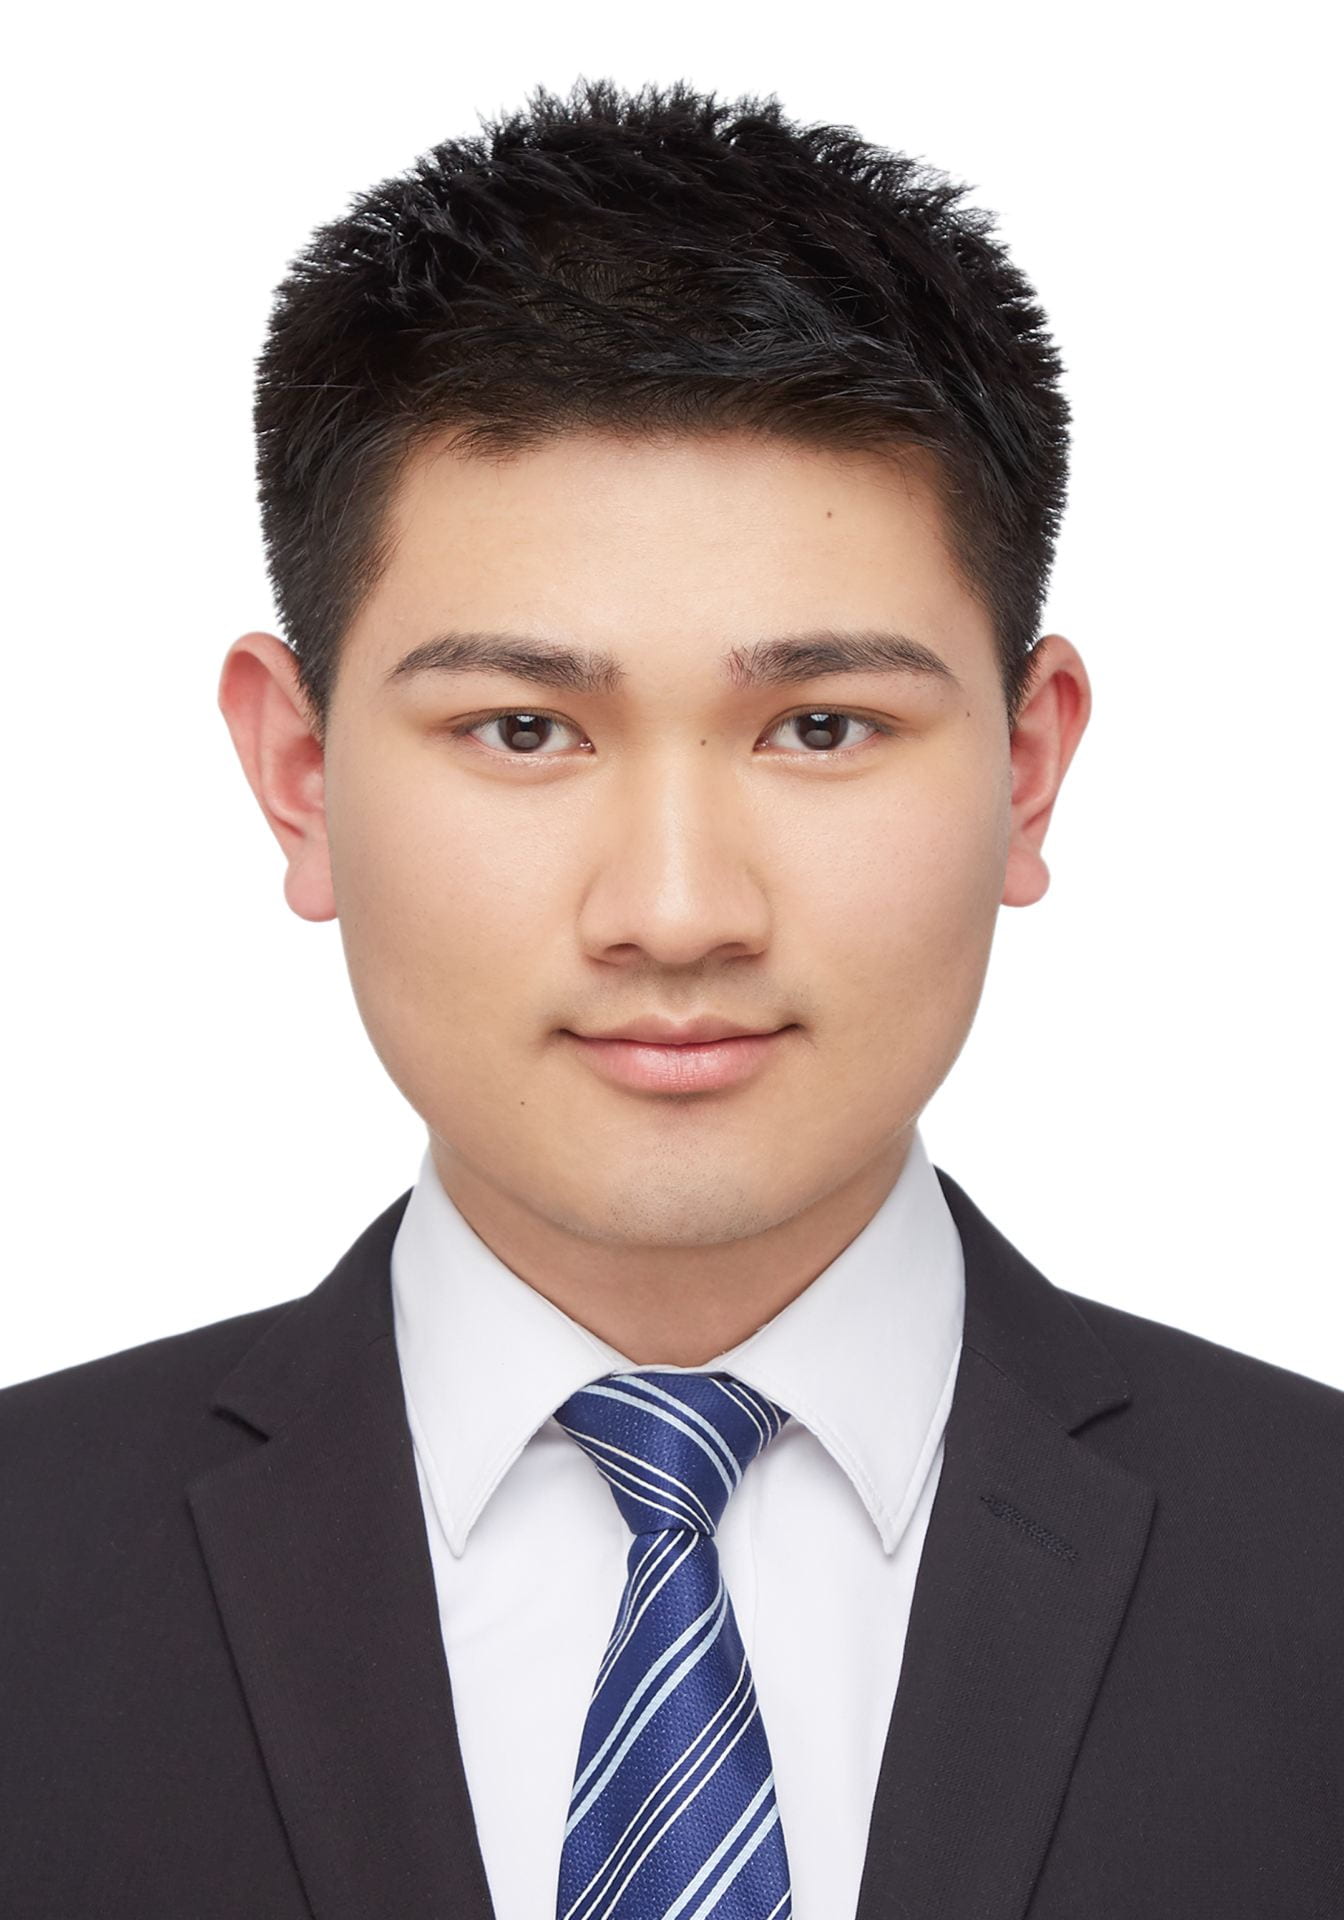 A picture of Tianxiang Liu in a suit, looking at the camera